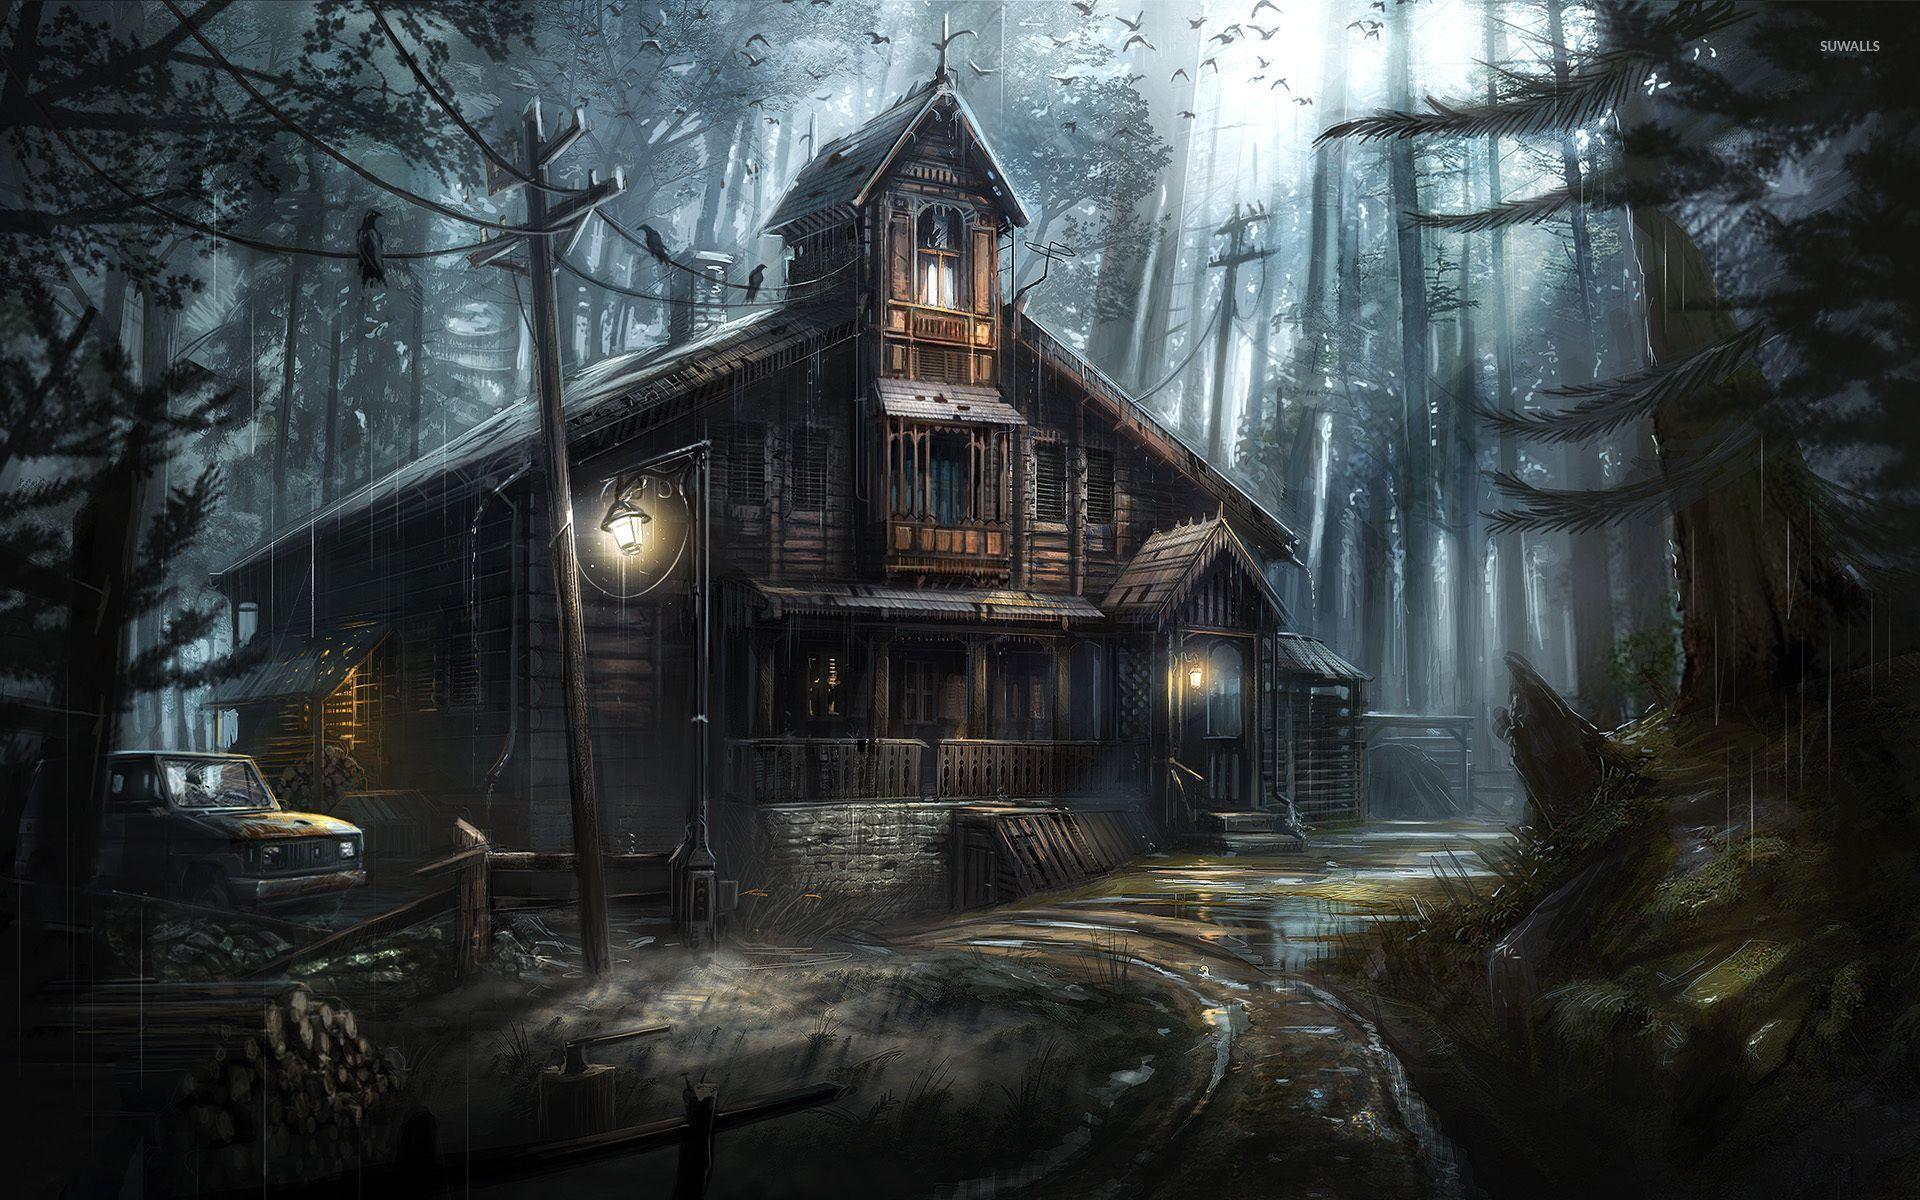 Creepy wooden house in the forest .suwalls.com